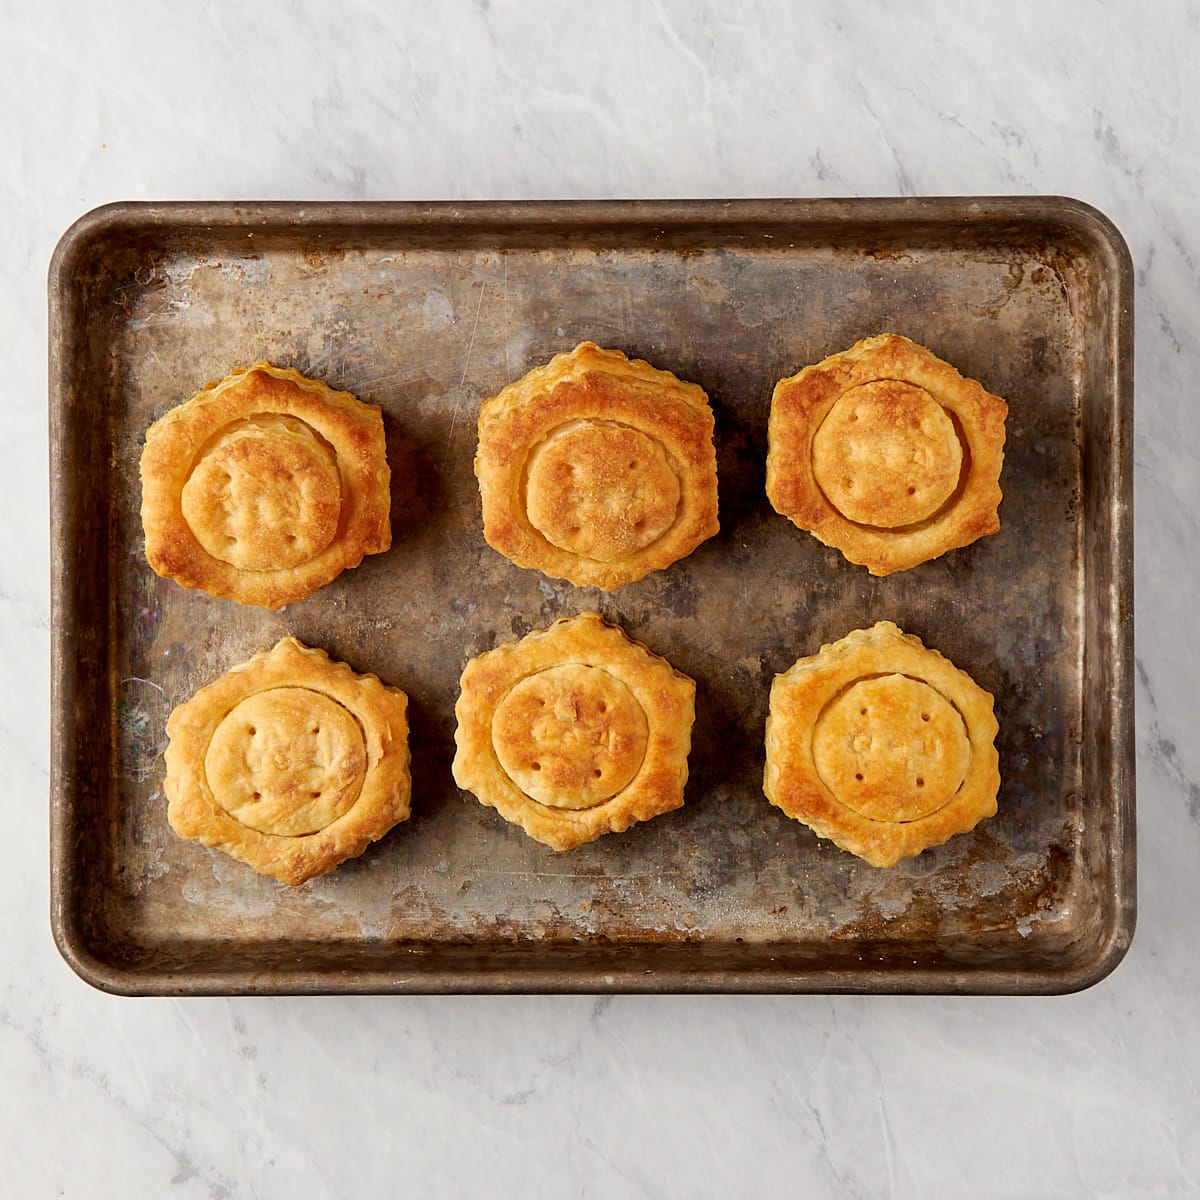 baked puff pastry shells on a baking sheet.